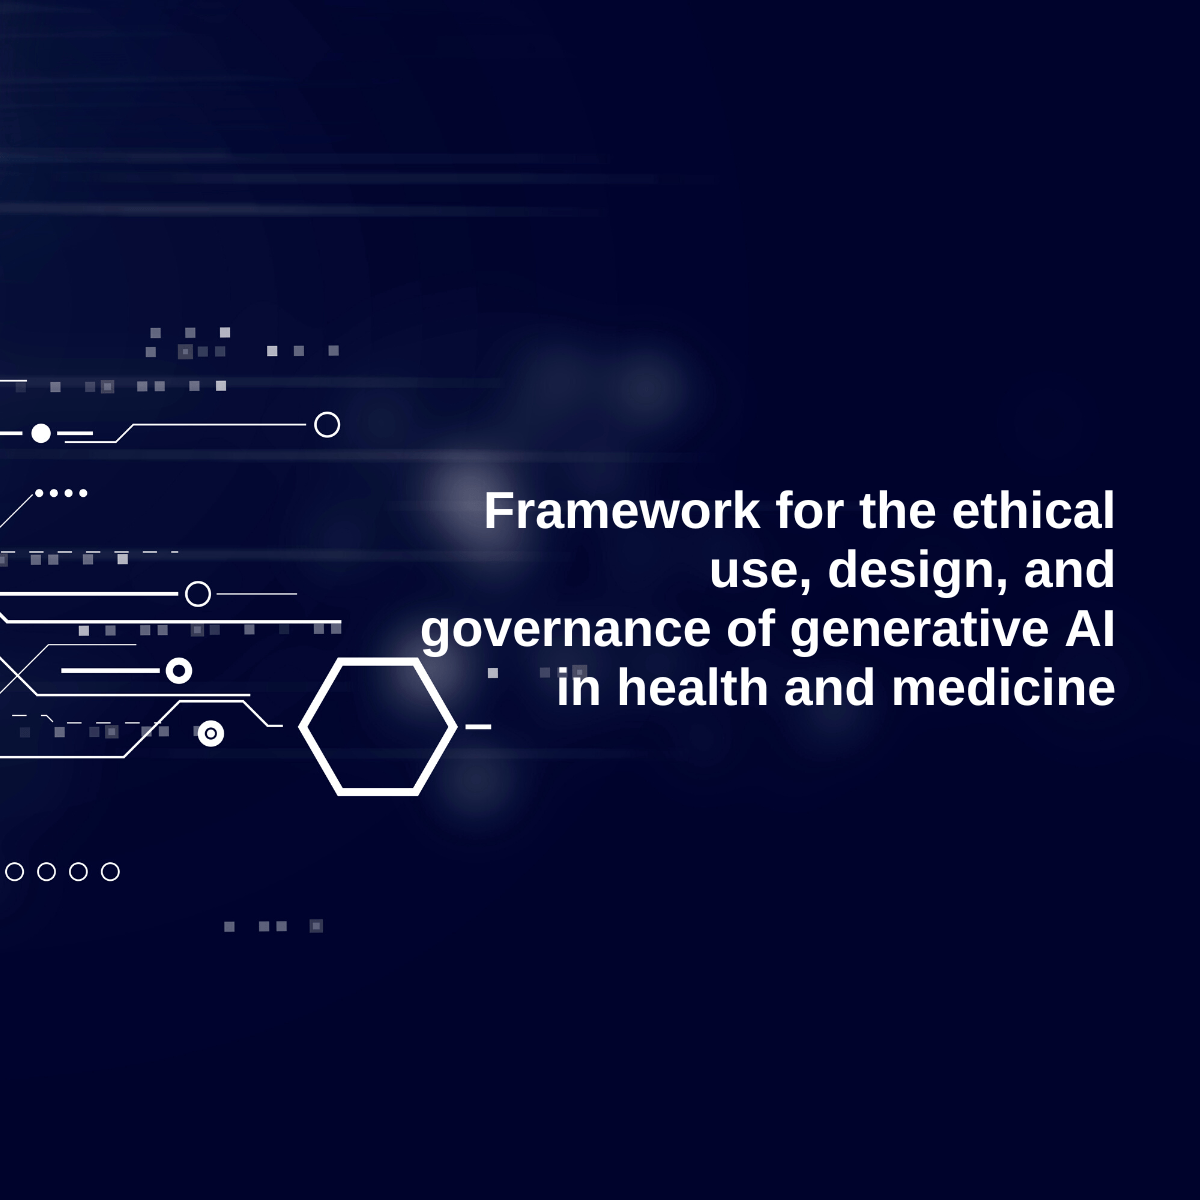 Framework for the ethical use, design, and governance of generative AI in health and medicine